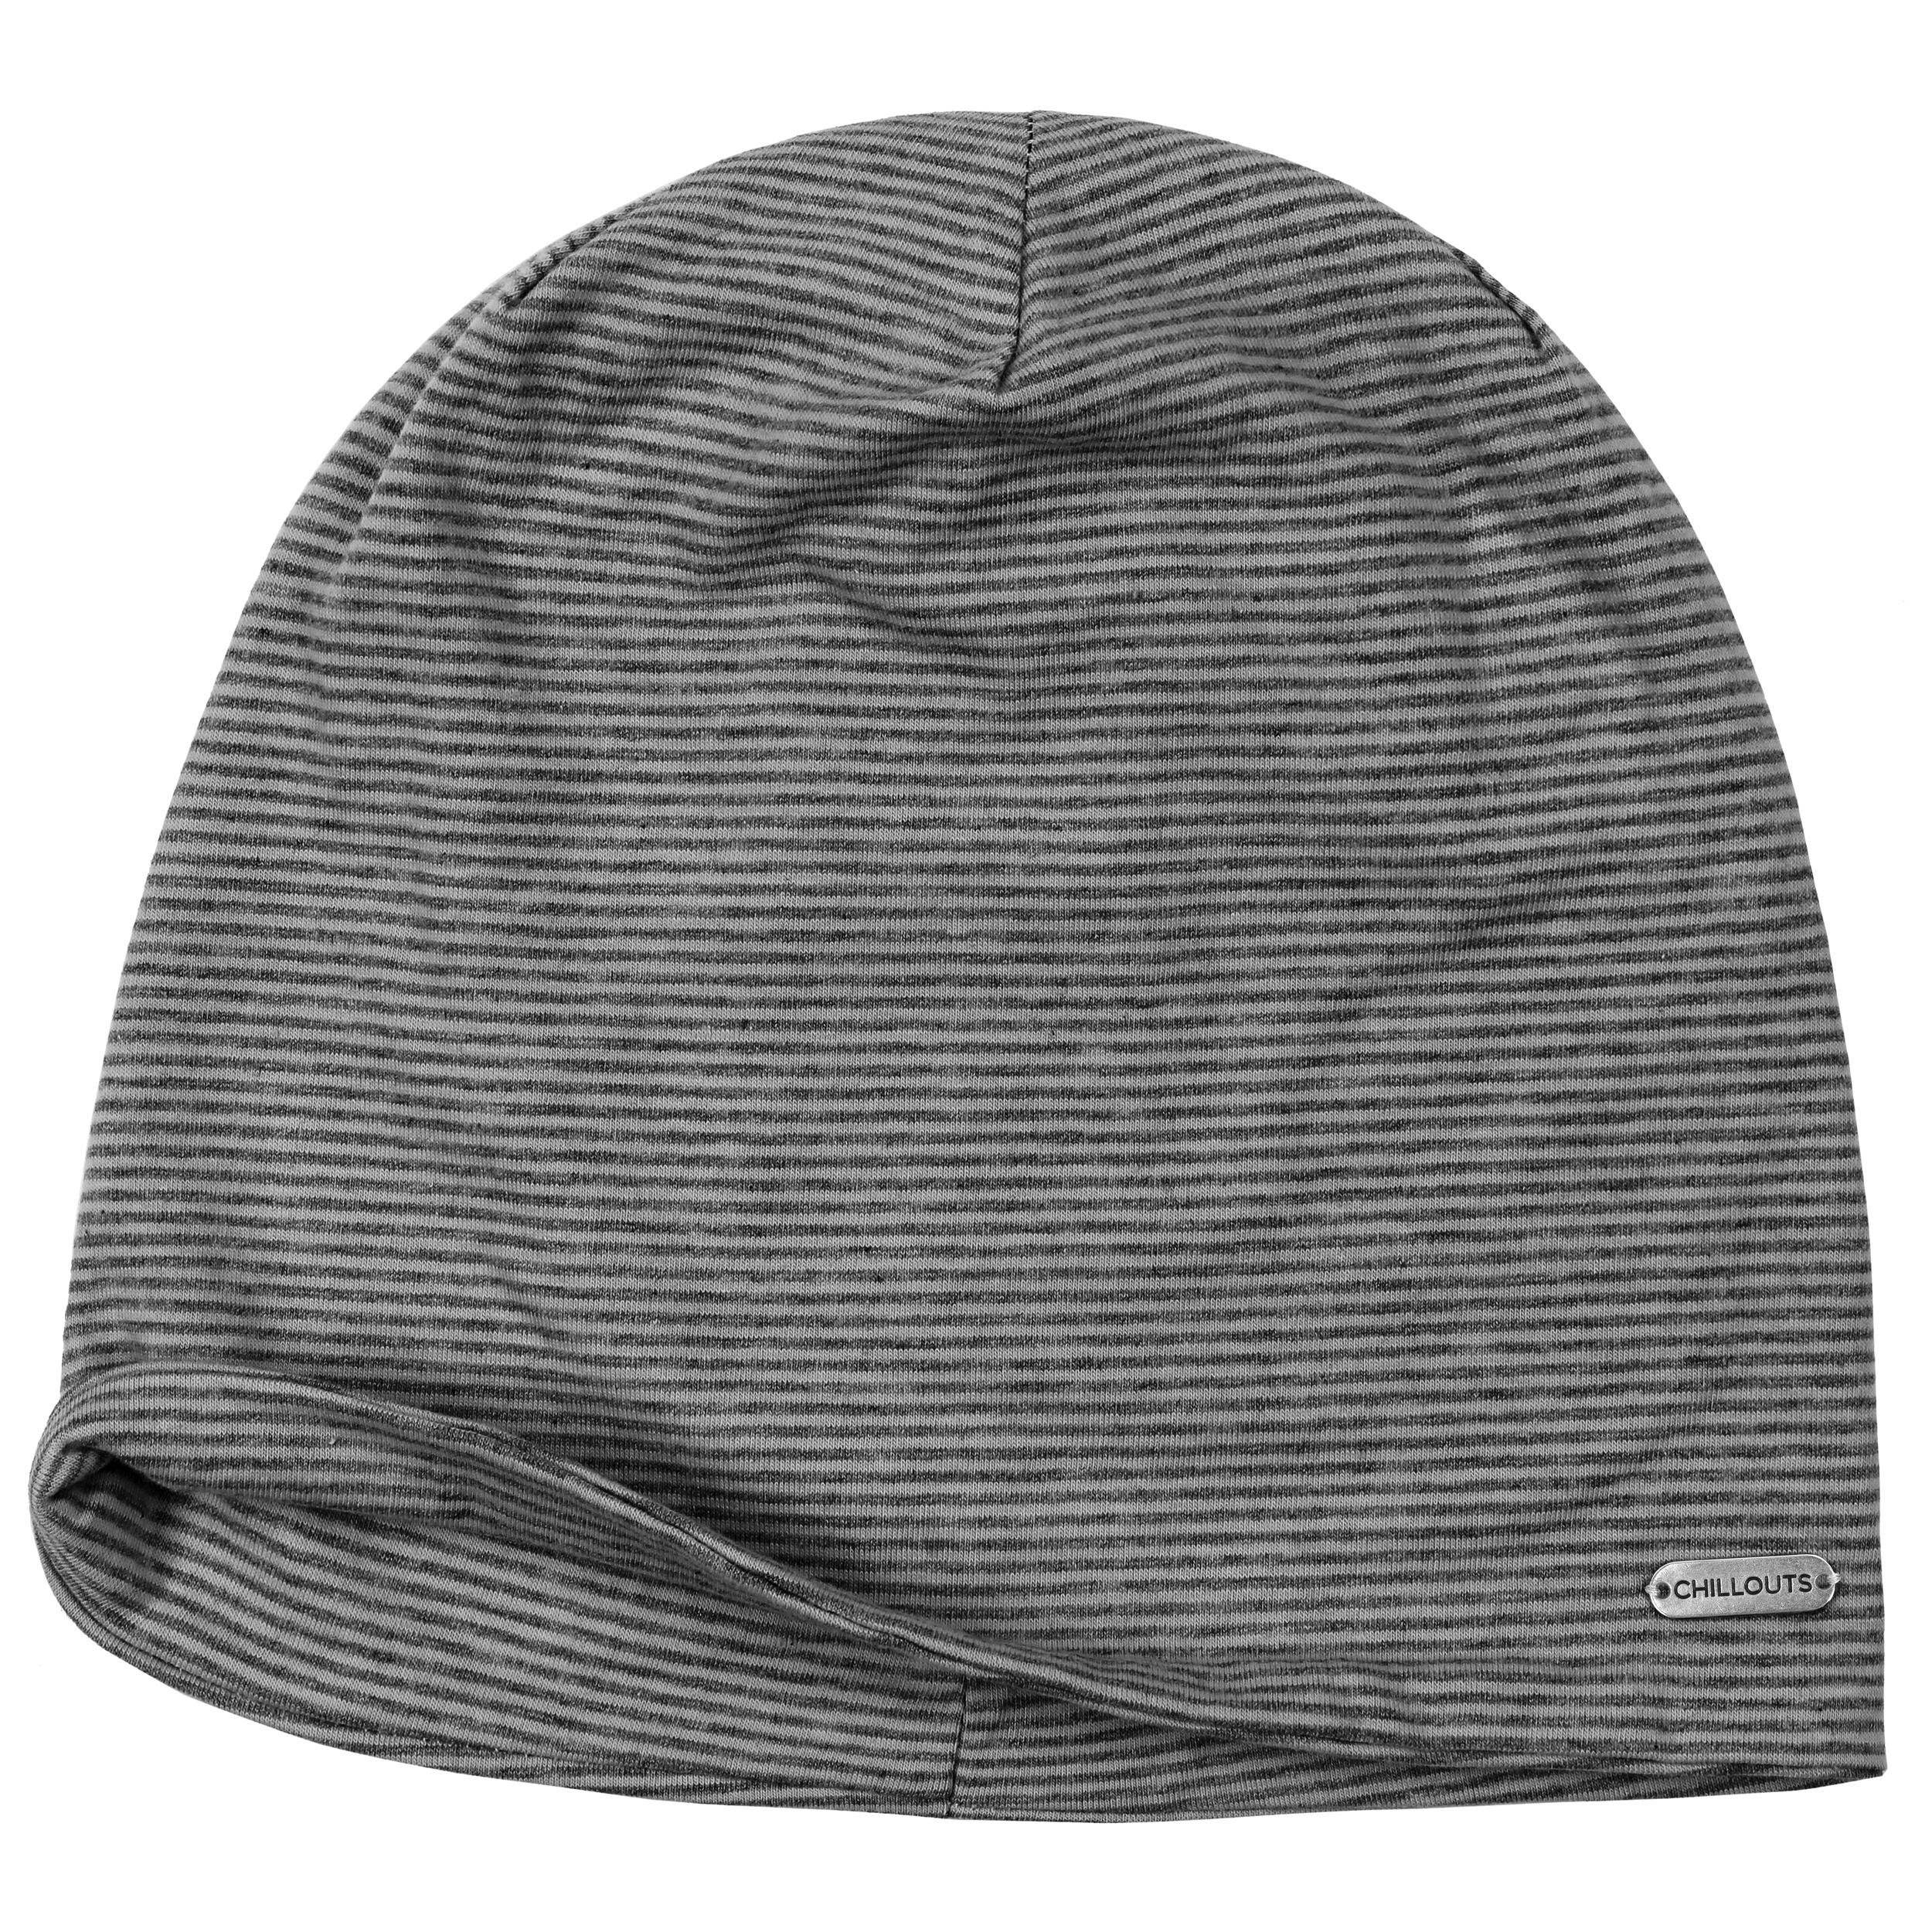 by Pittsburgh Oversize Beanie 24,95 - Chillouts €